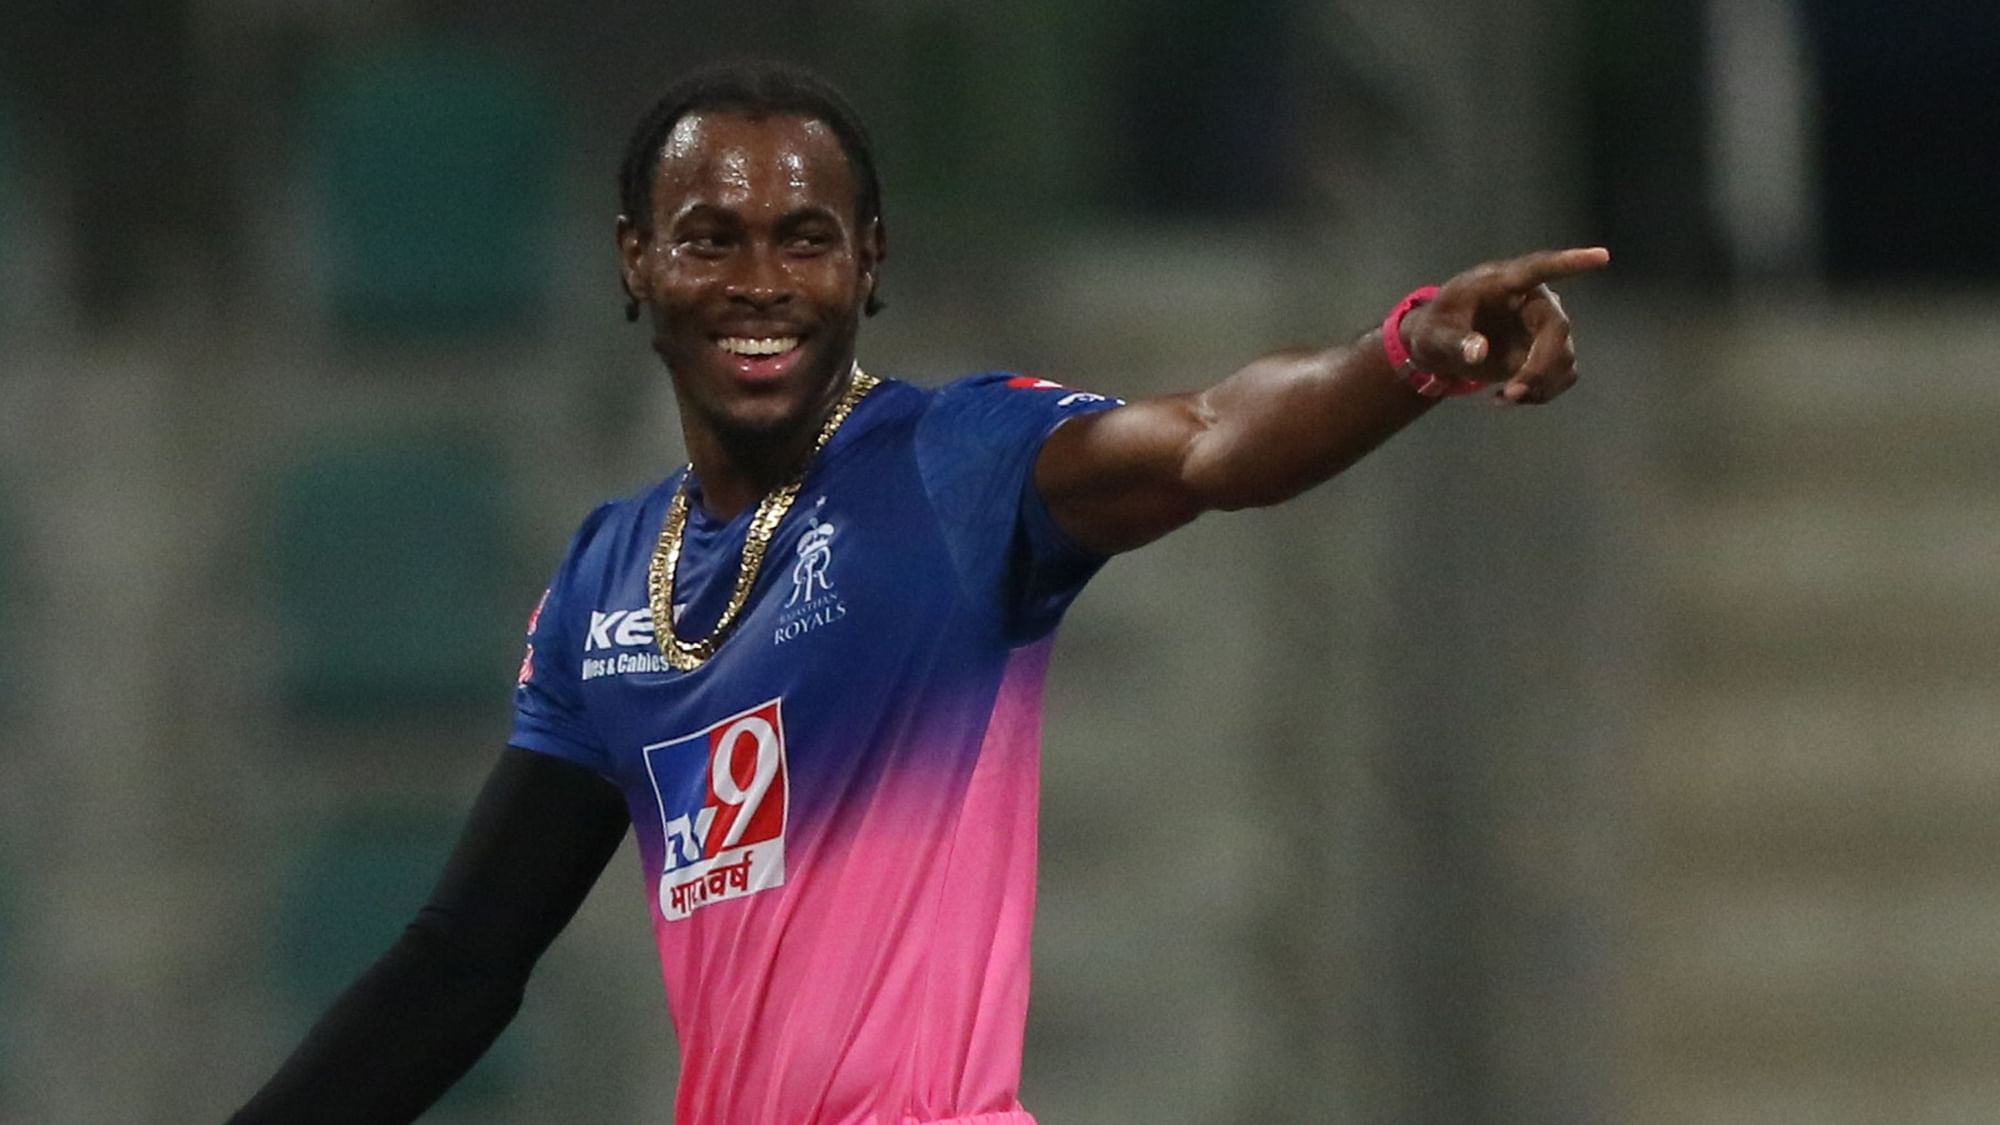 Jofra Archer to Miss Initial Phase of IPL 2021: ECB